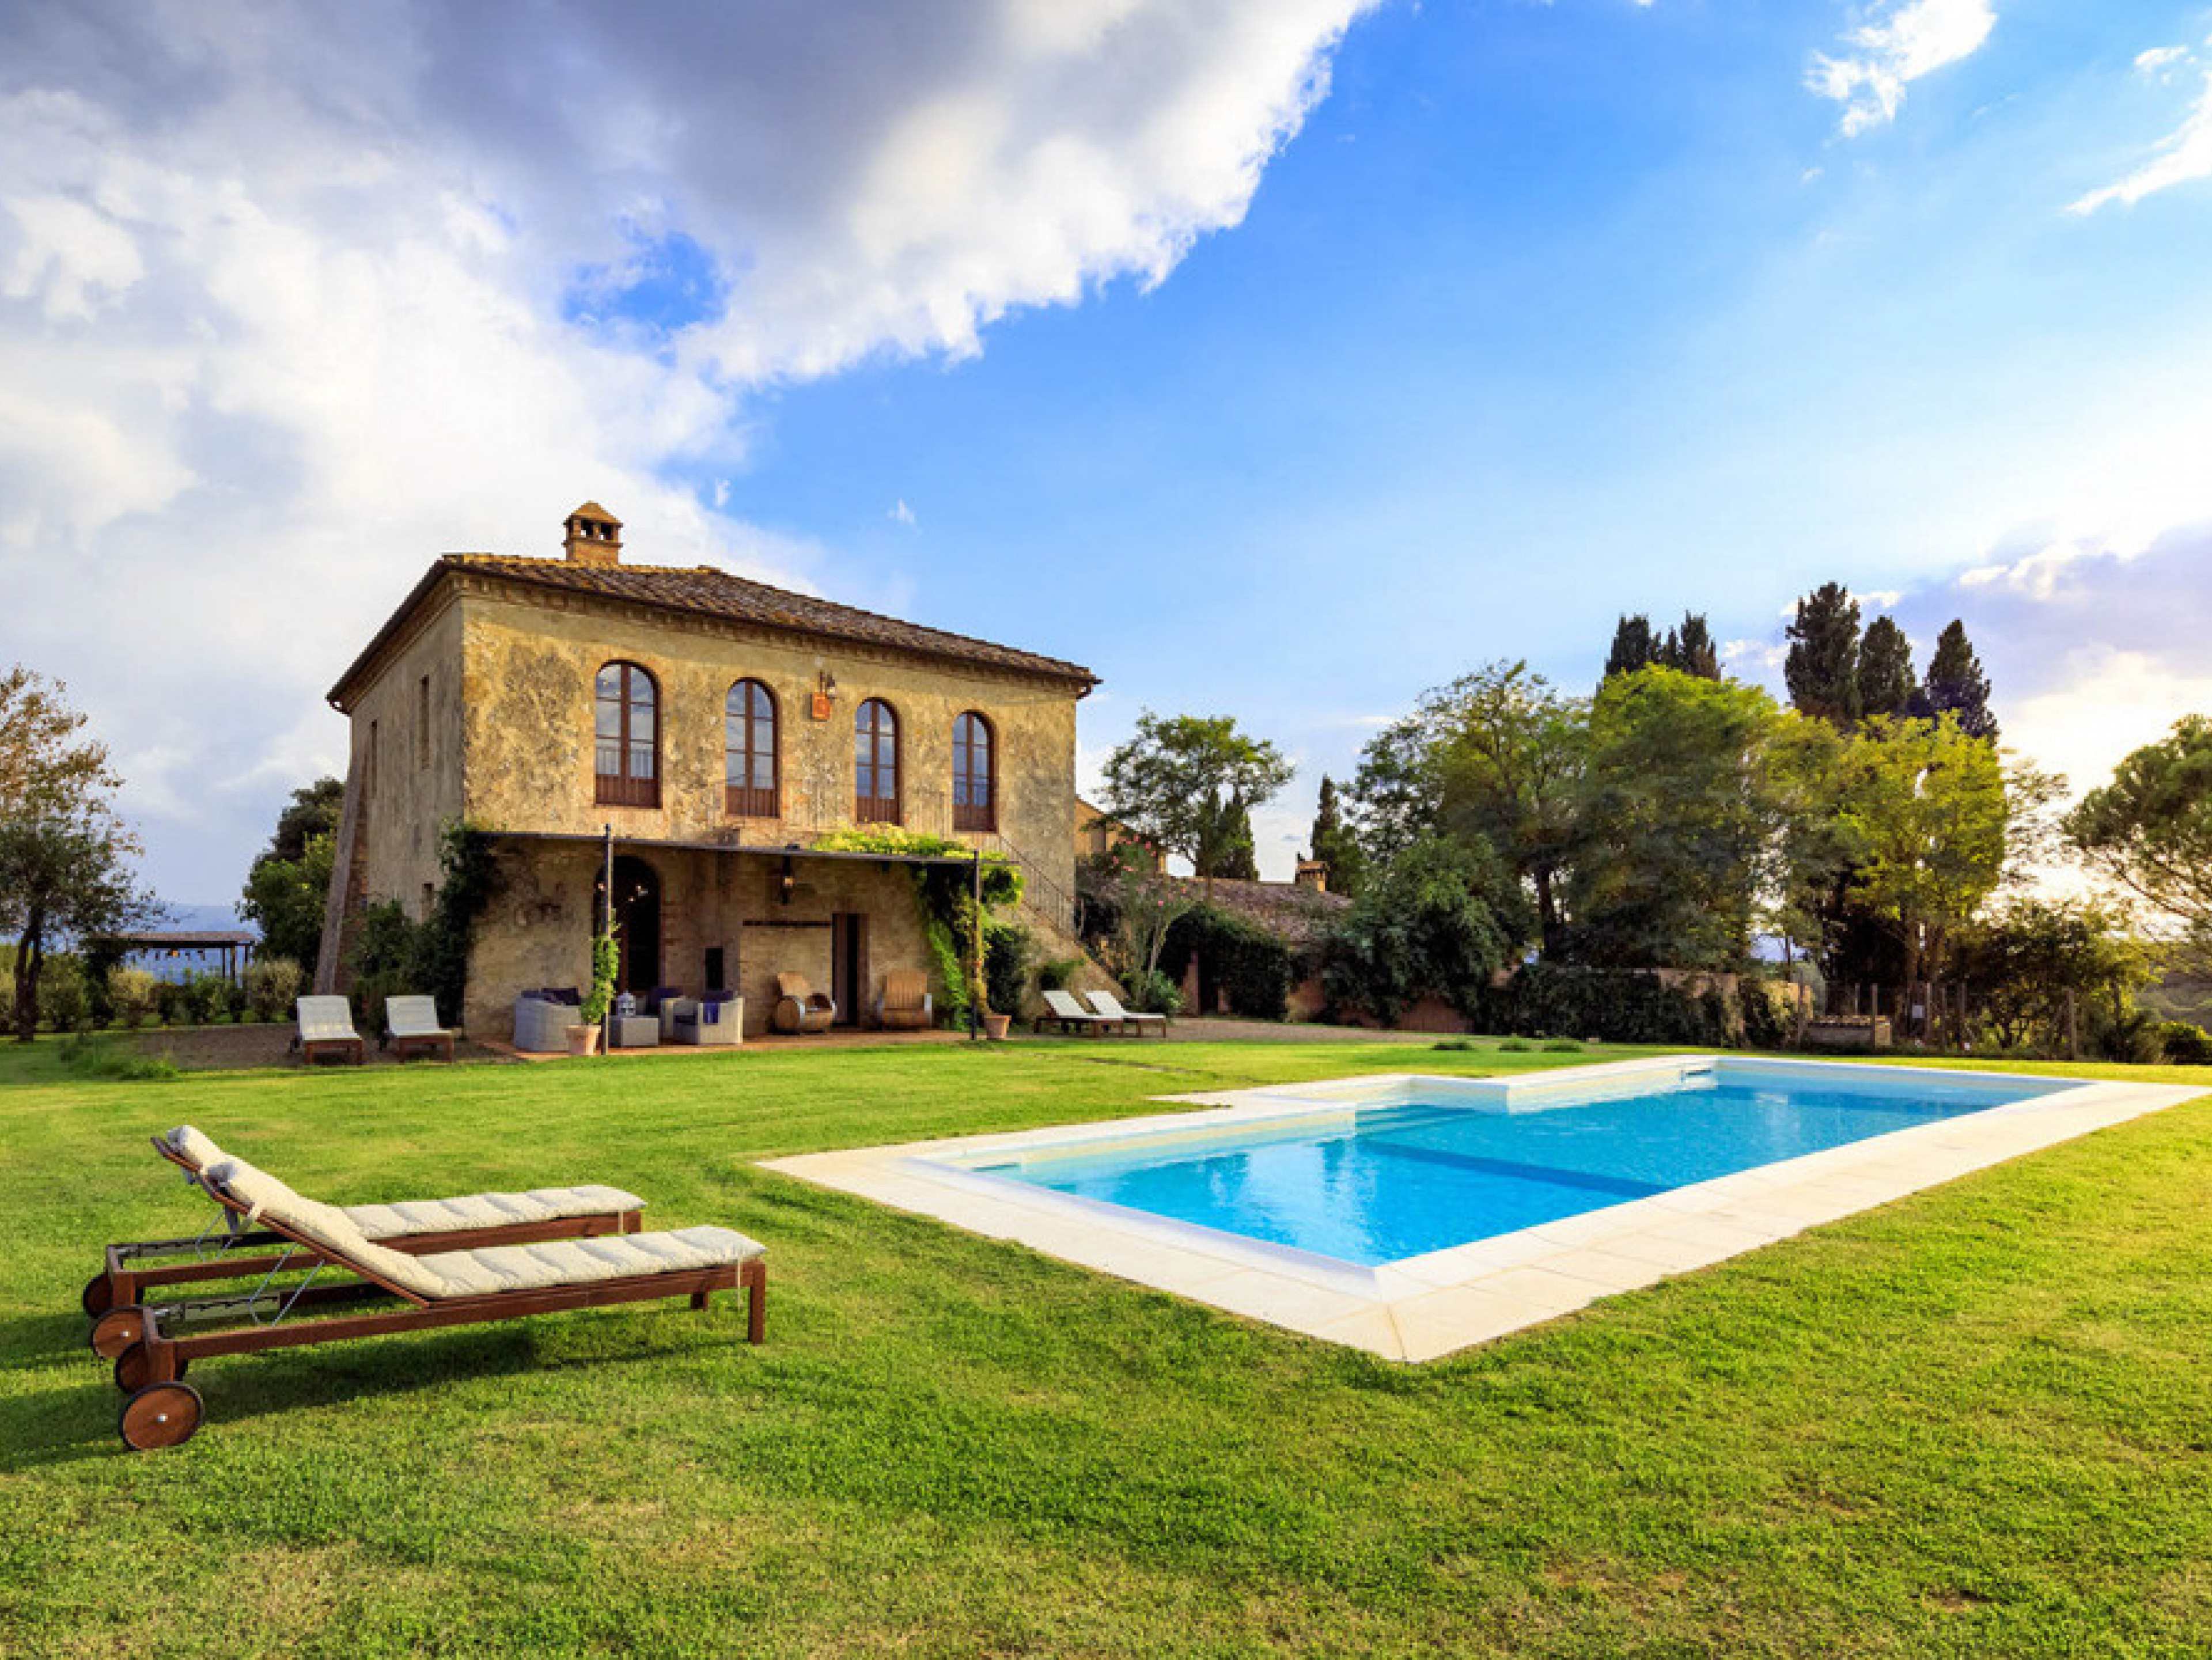 Lagesta - villas in Tuscany with pools